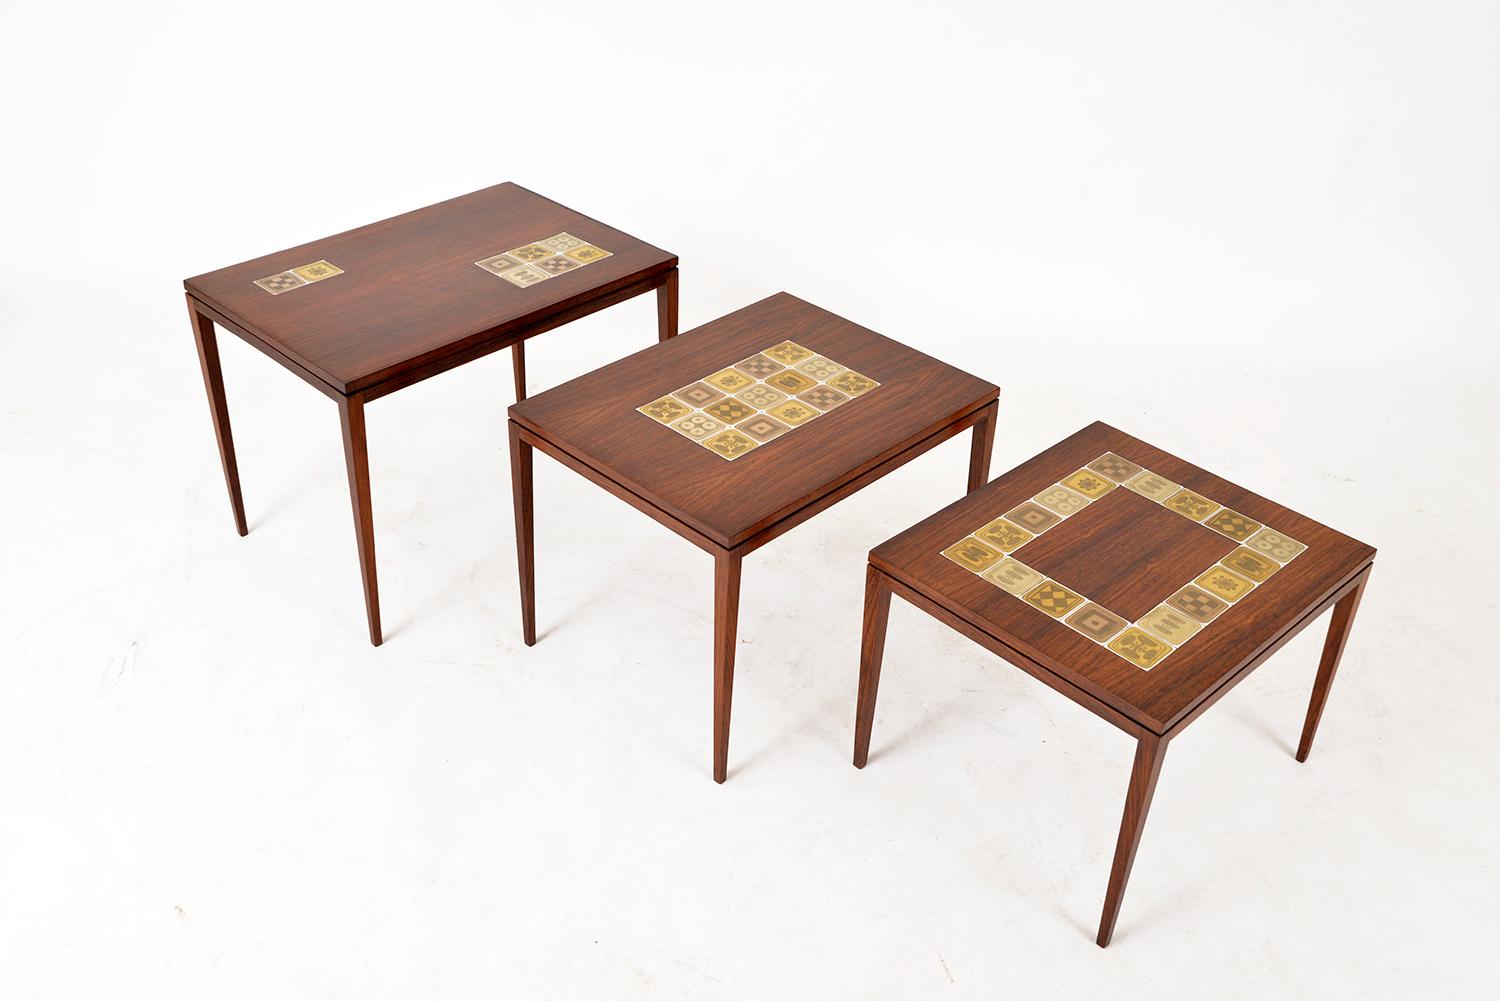 Stunning nest of three side tables of receding heights by Rosenthal Domus, each with a different arrangement of porcelain tile inlays from Bjørn Wiinblad’s Quatre Couleurs design in exuberant tones of gold on a white glaze. All three tables bear the